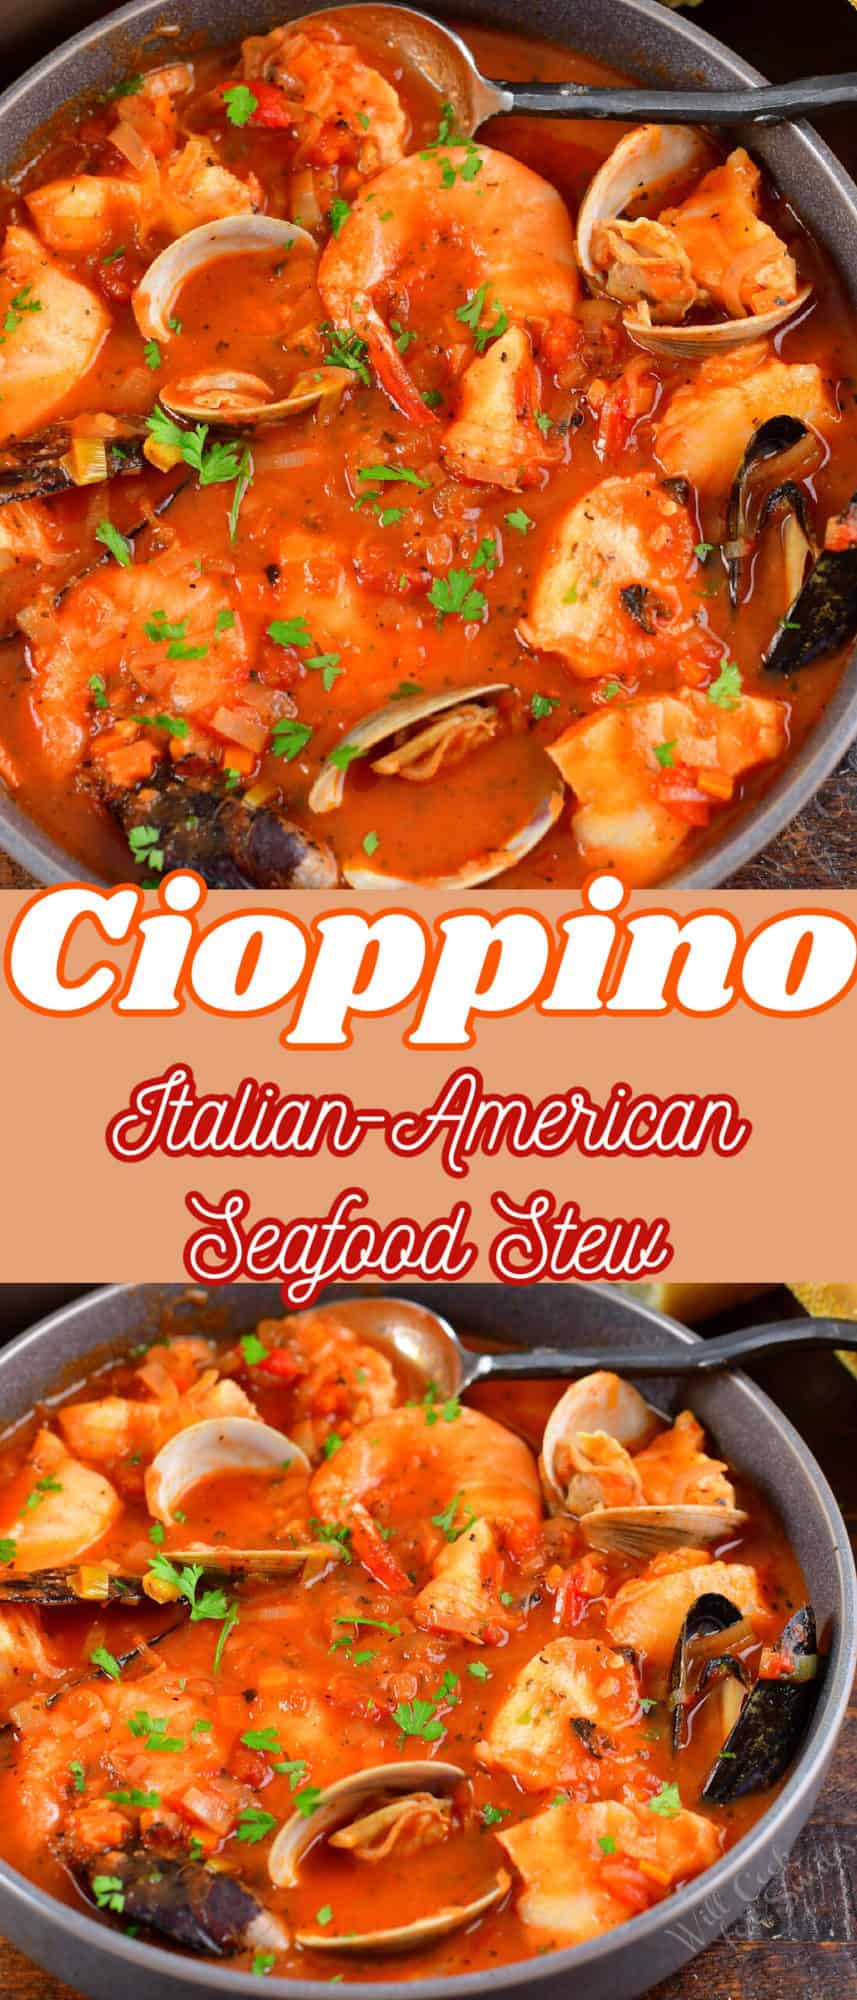 collage of two images of Cioppino seafood stew in a bowl